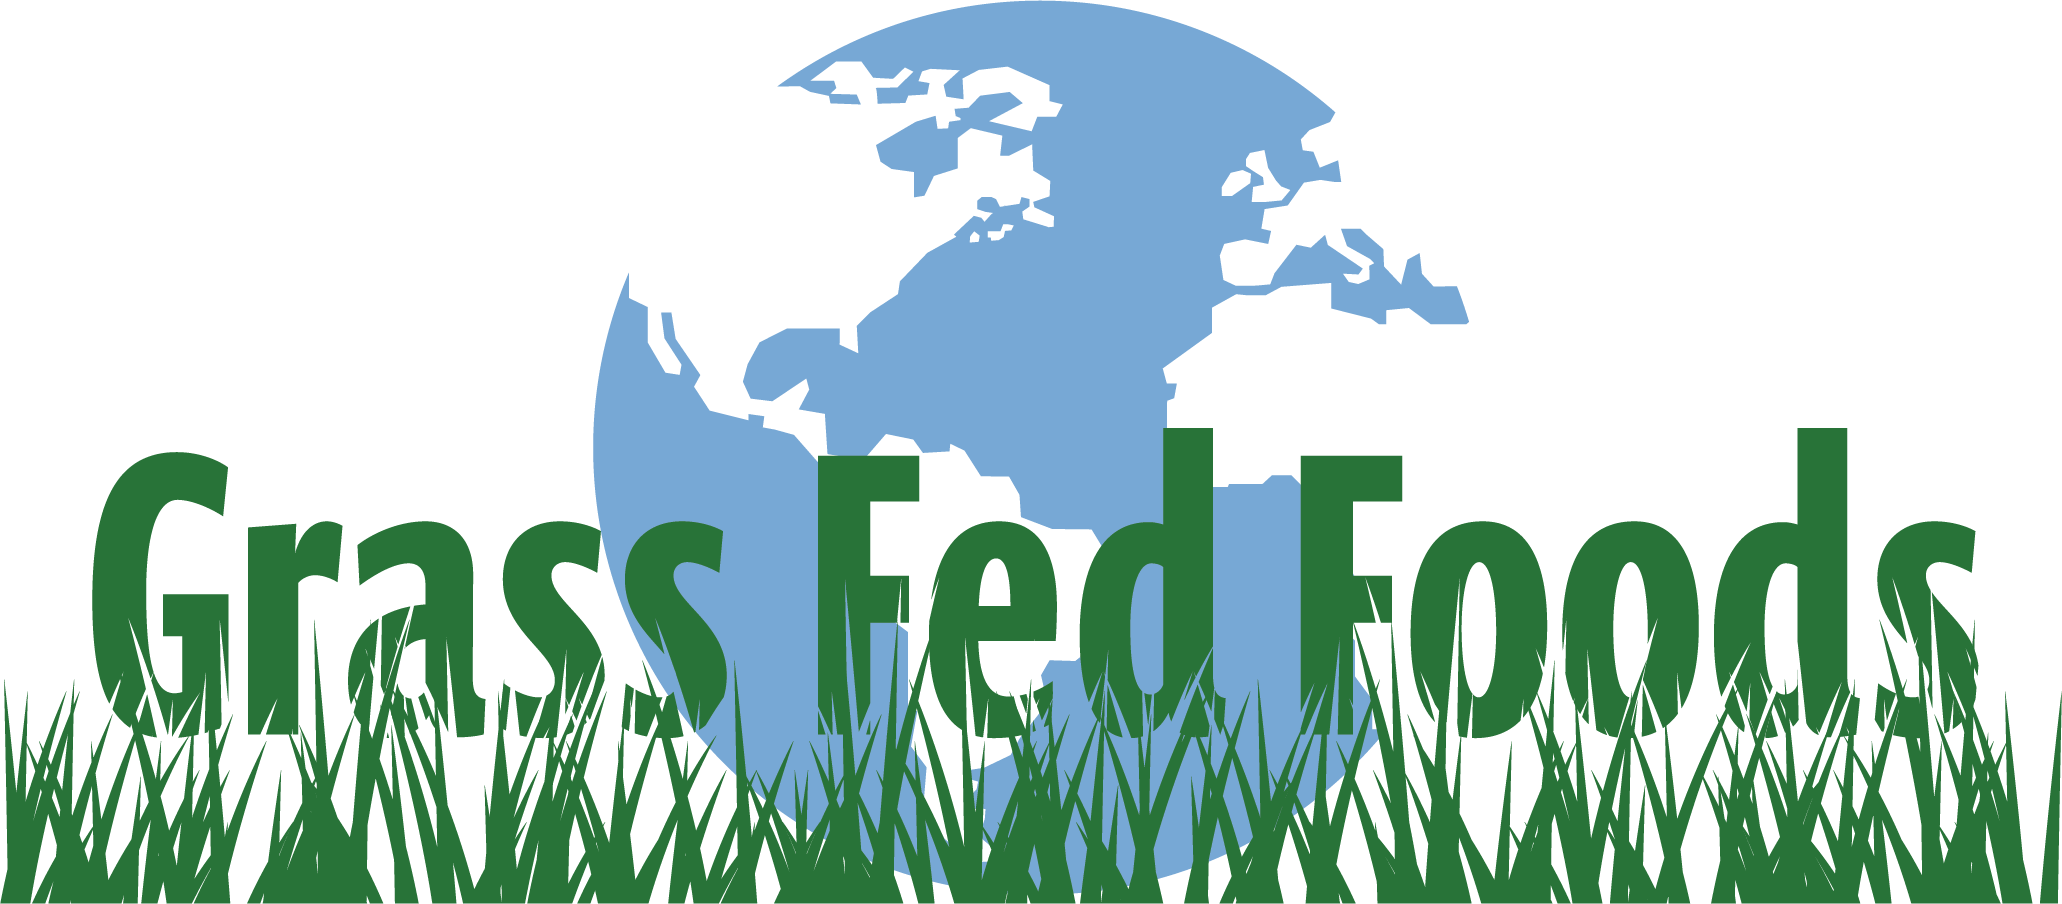 logo shows grass fed foods text over planet with grass